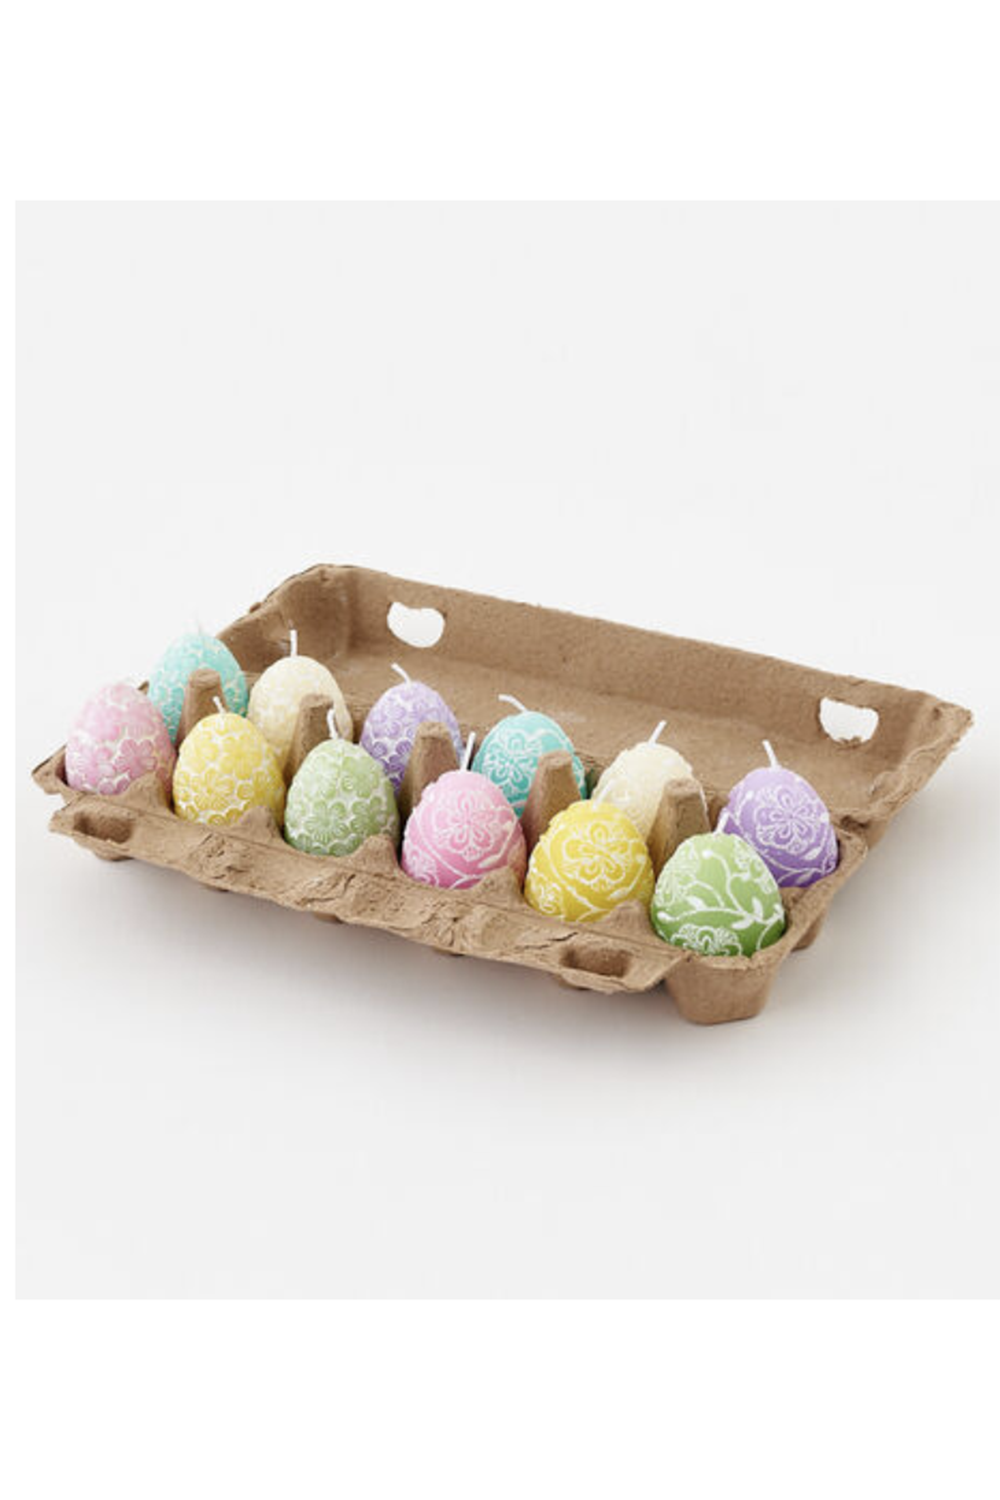 Floral Egg Candle in Crate